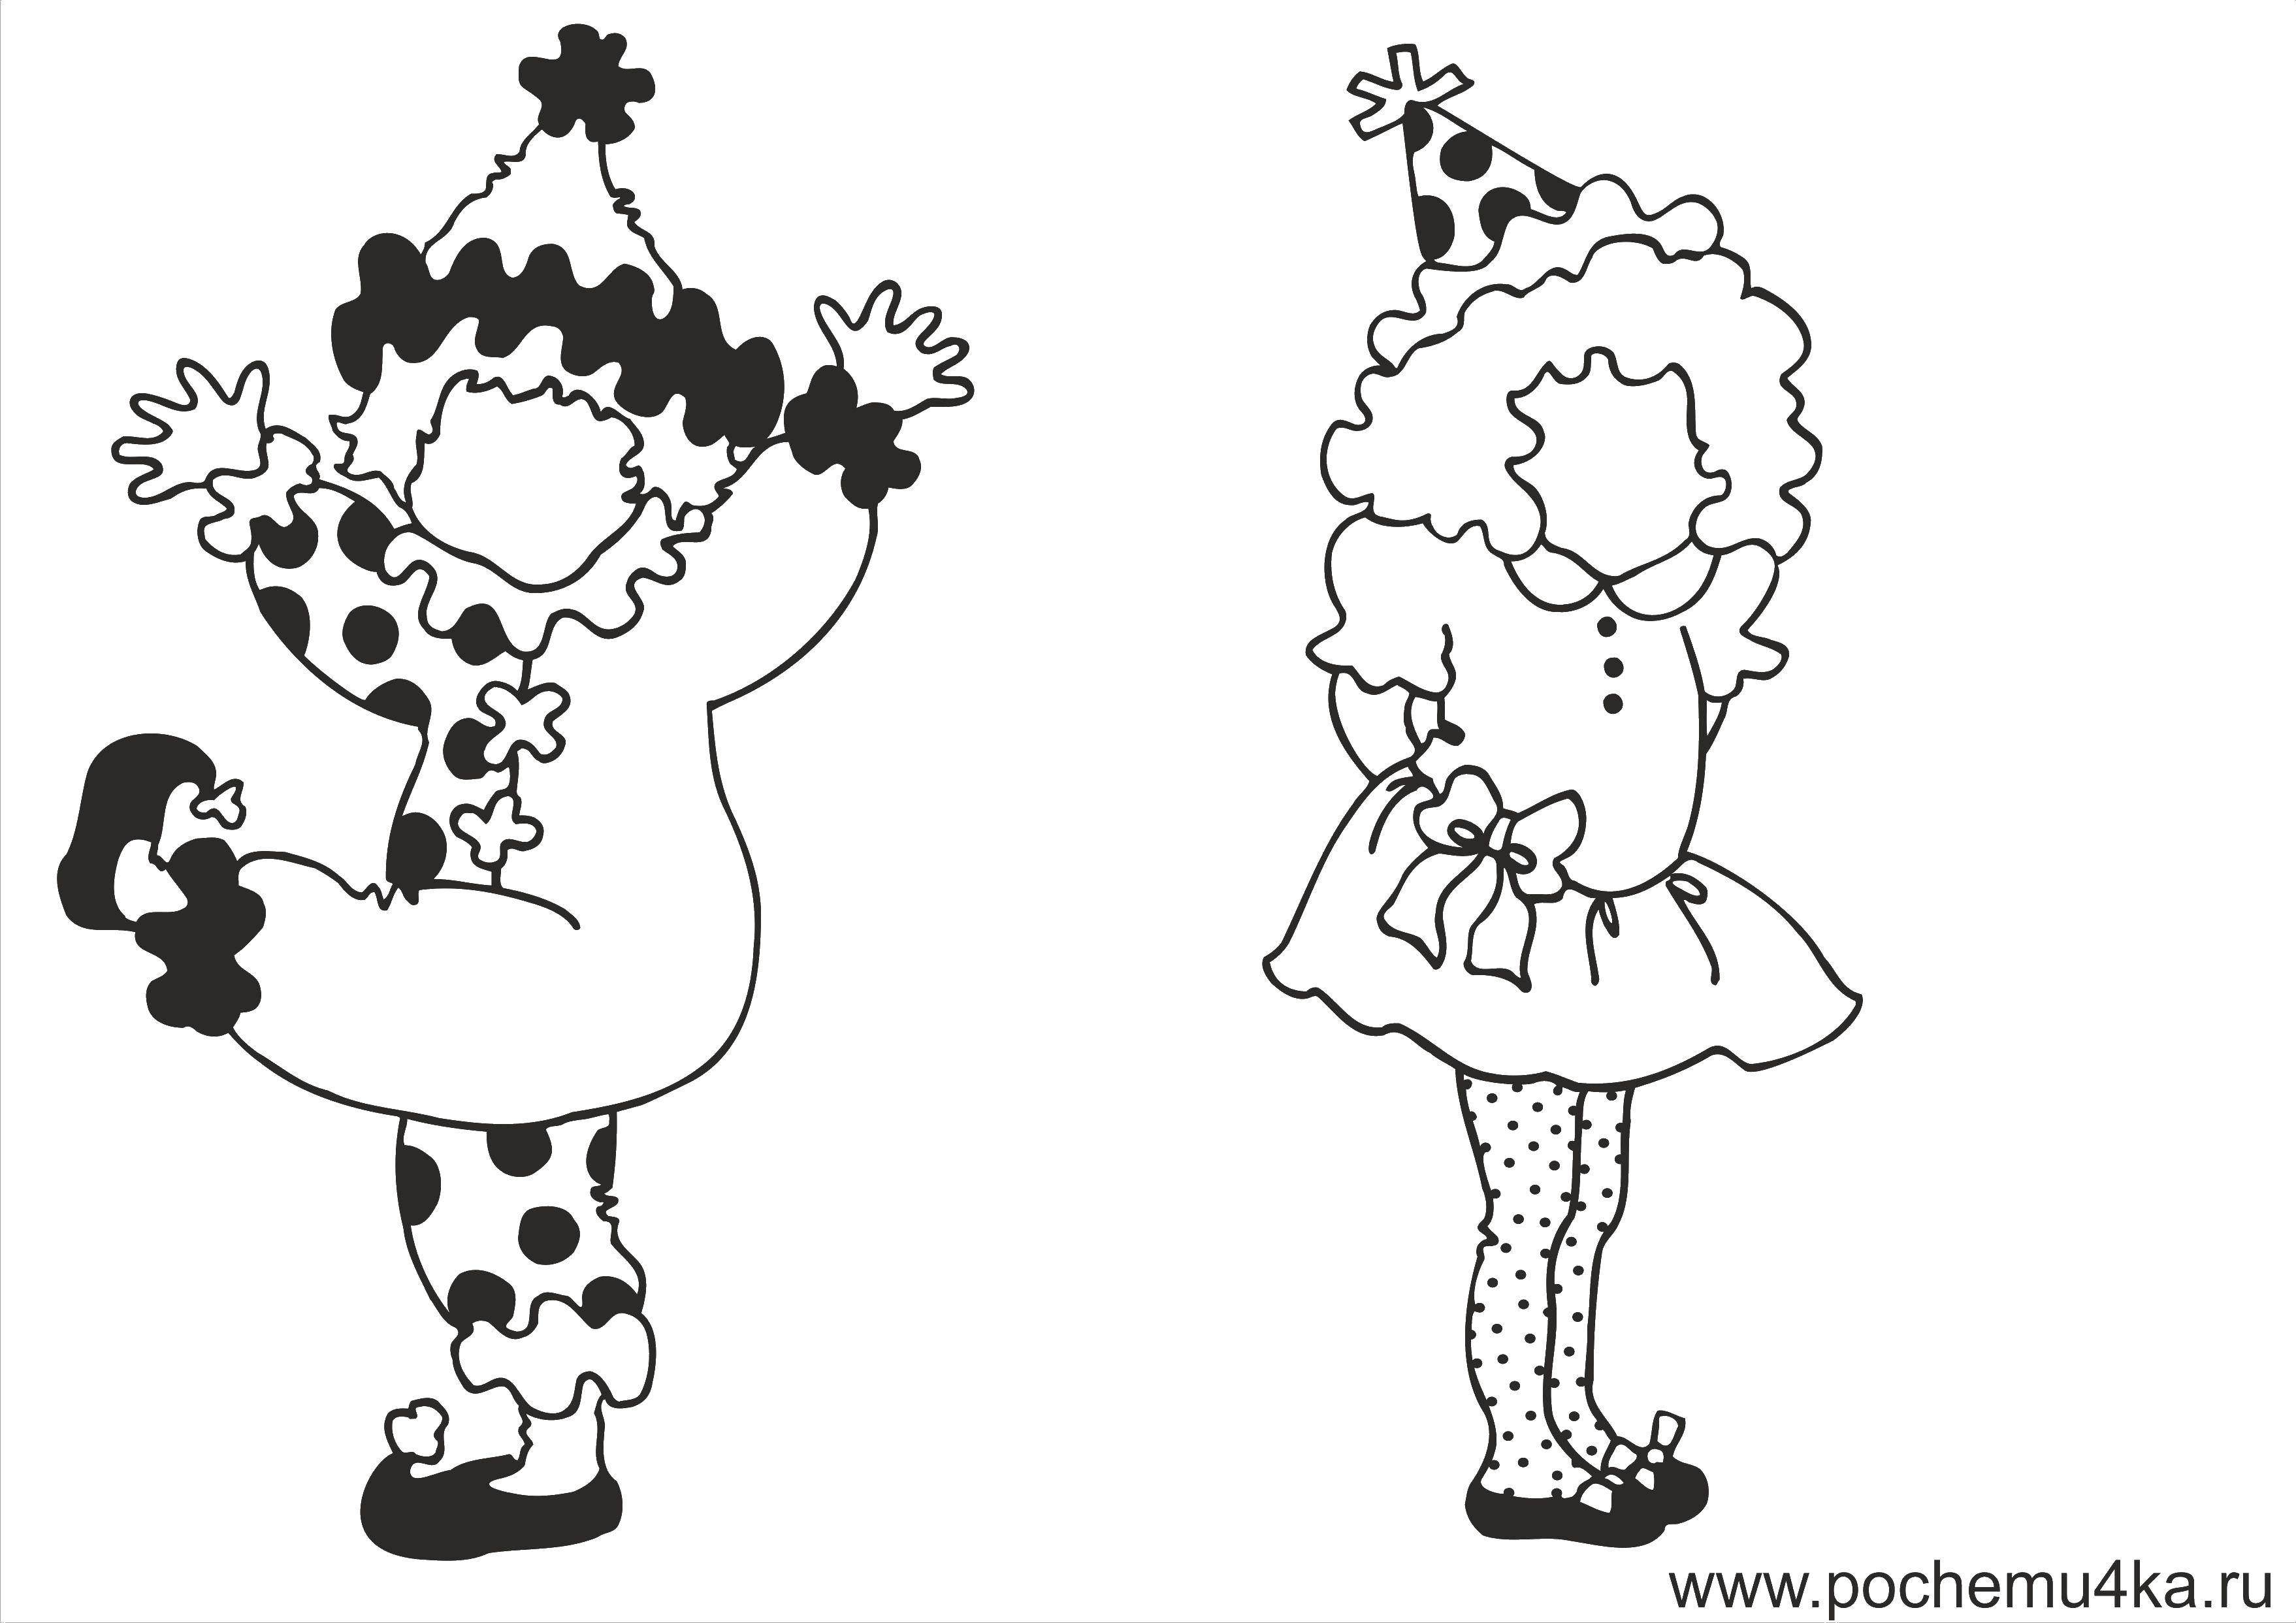 Coloring Clowns. Category children. Tags:  children, costumes, clowns.